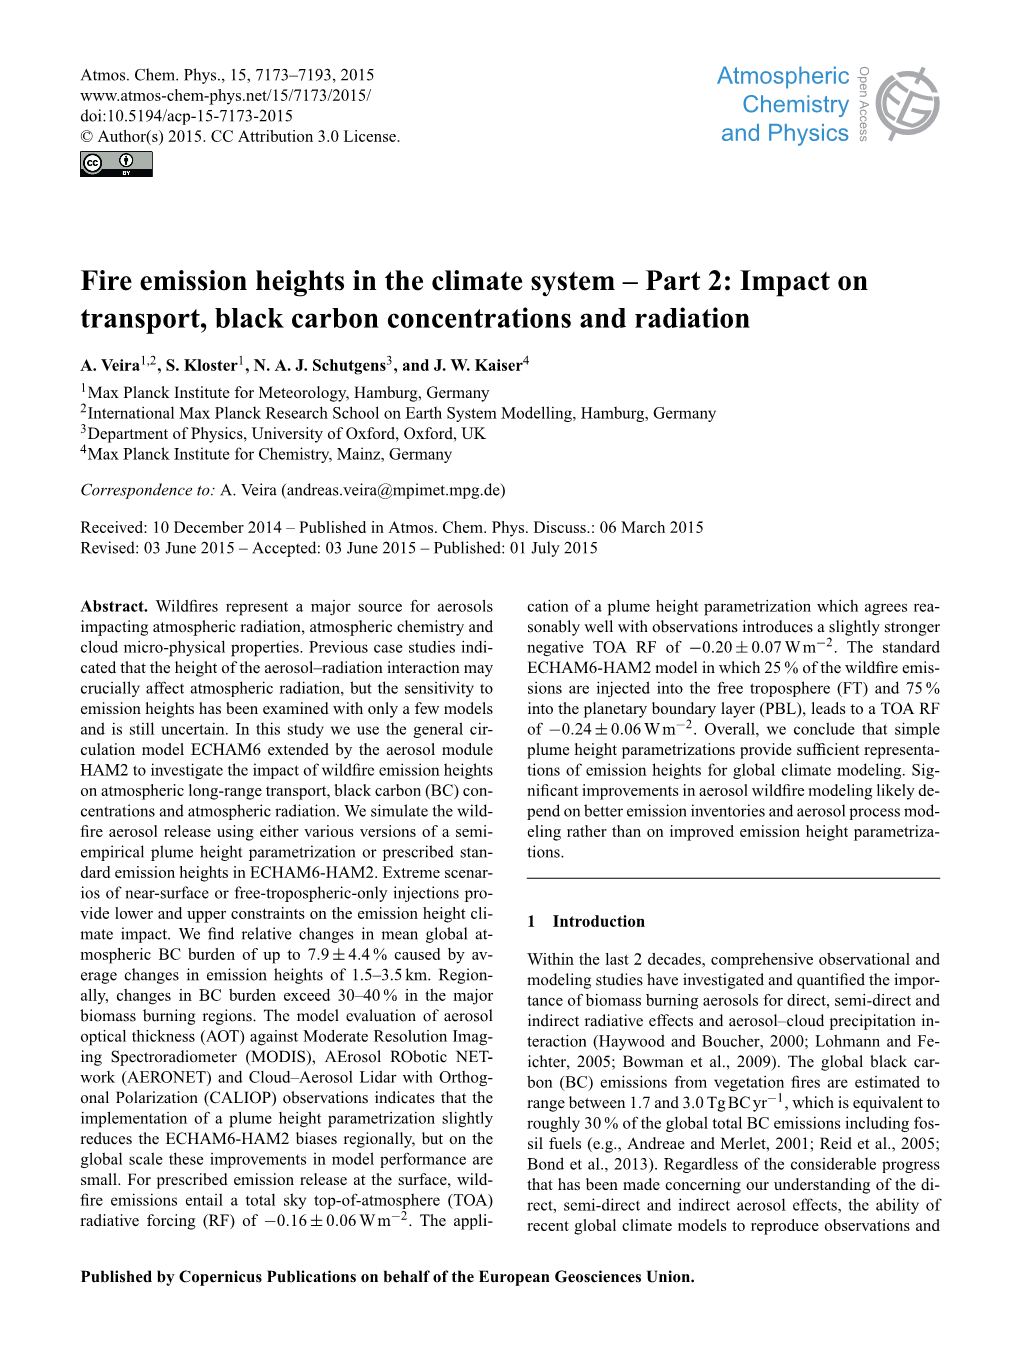 Fire Emission Heights in the Climate System – Part 2: Impact on Transport, Black Carbon Concentrations and Radiation